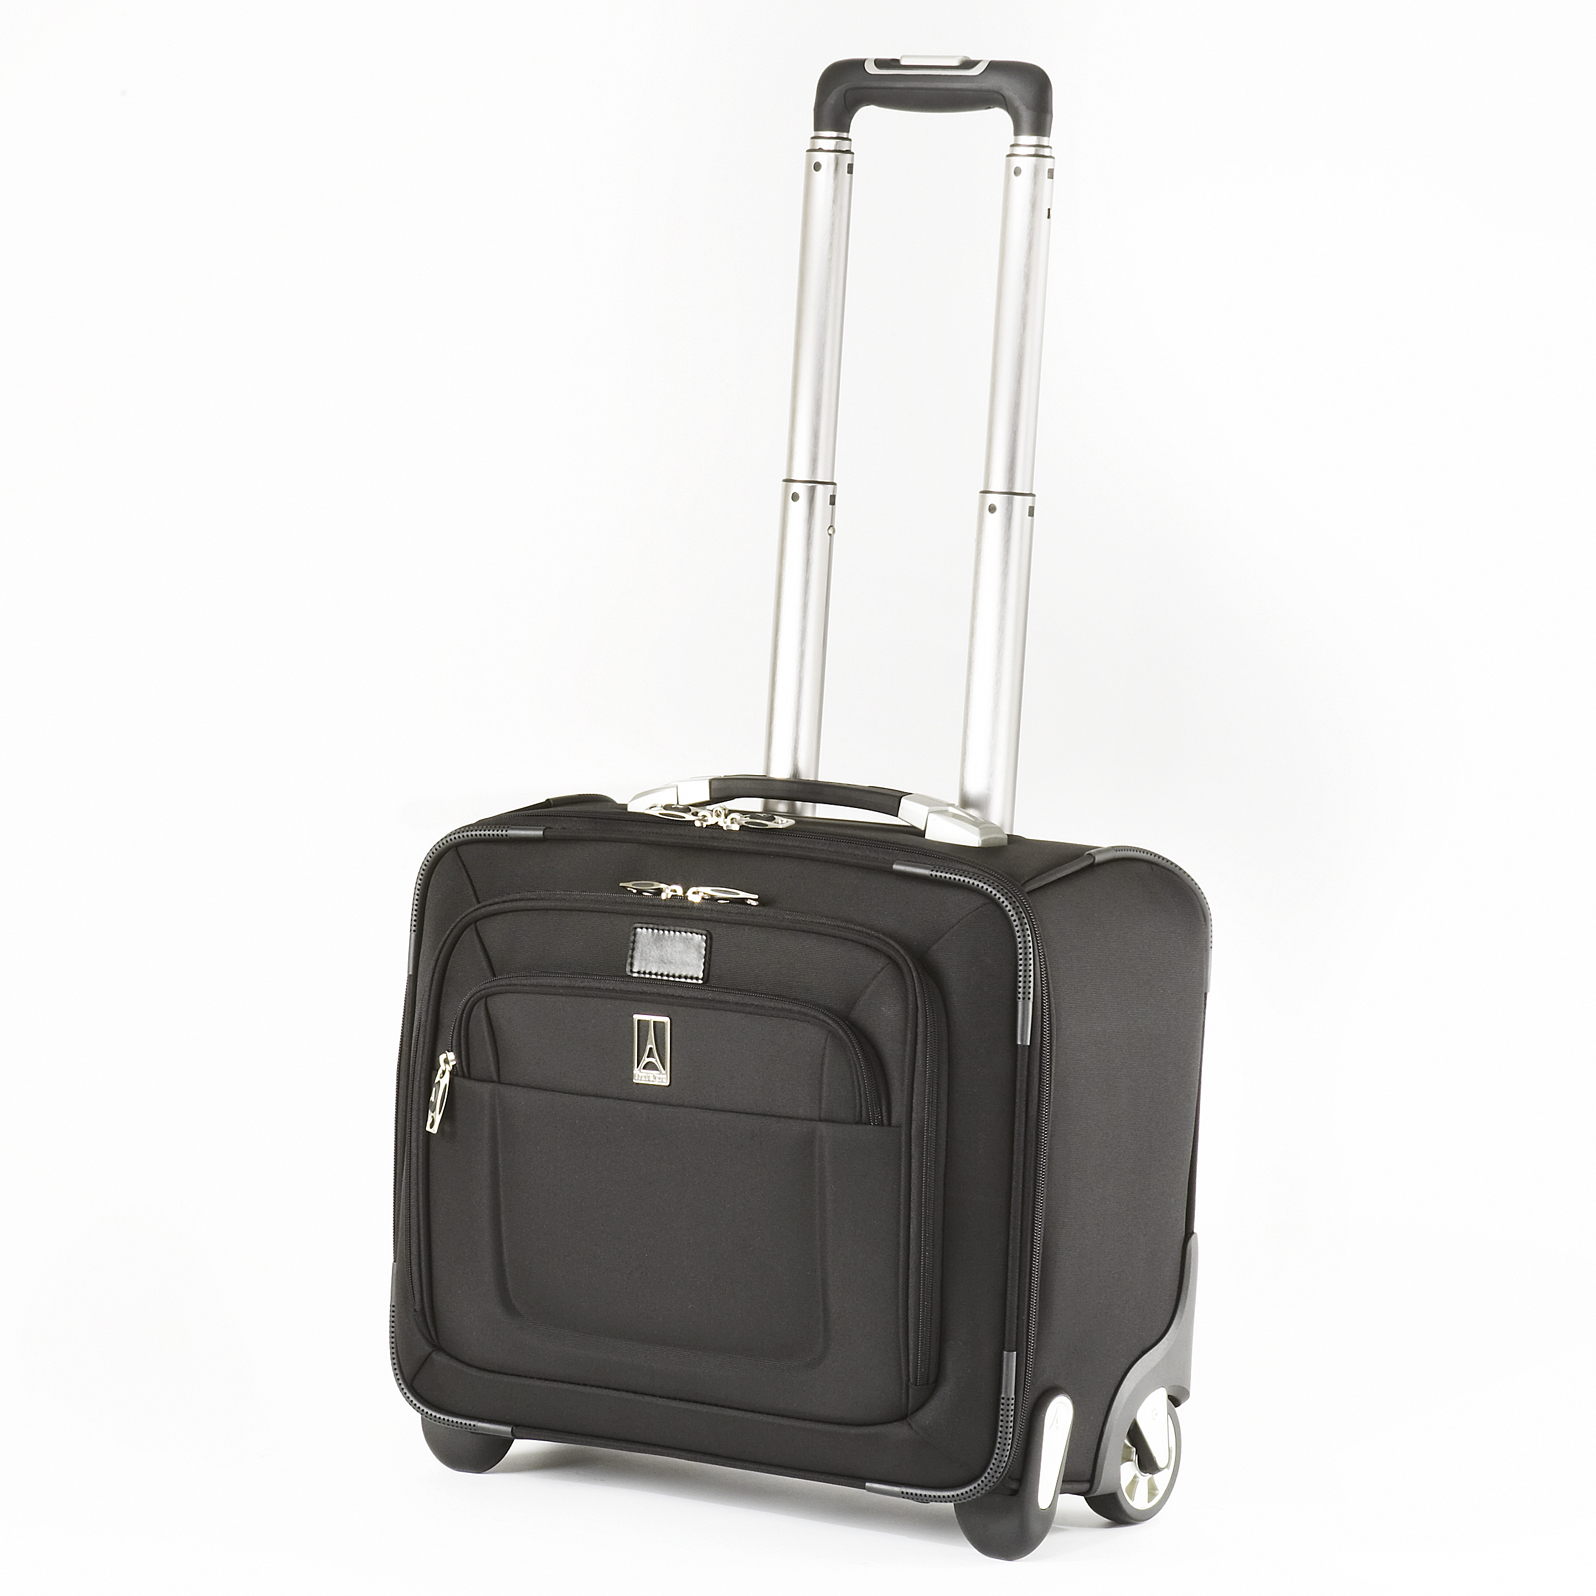 luggage commute to go for work bags and security fast free